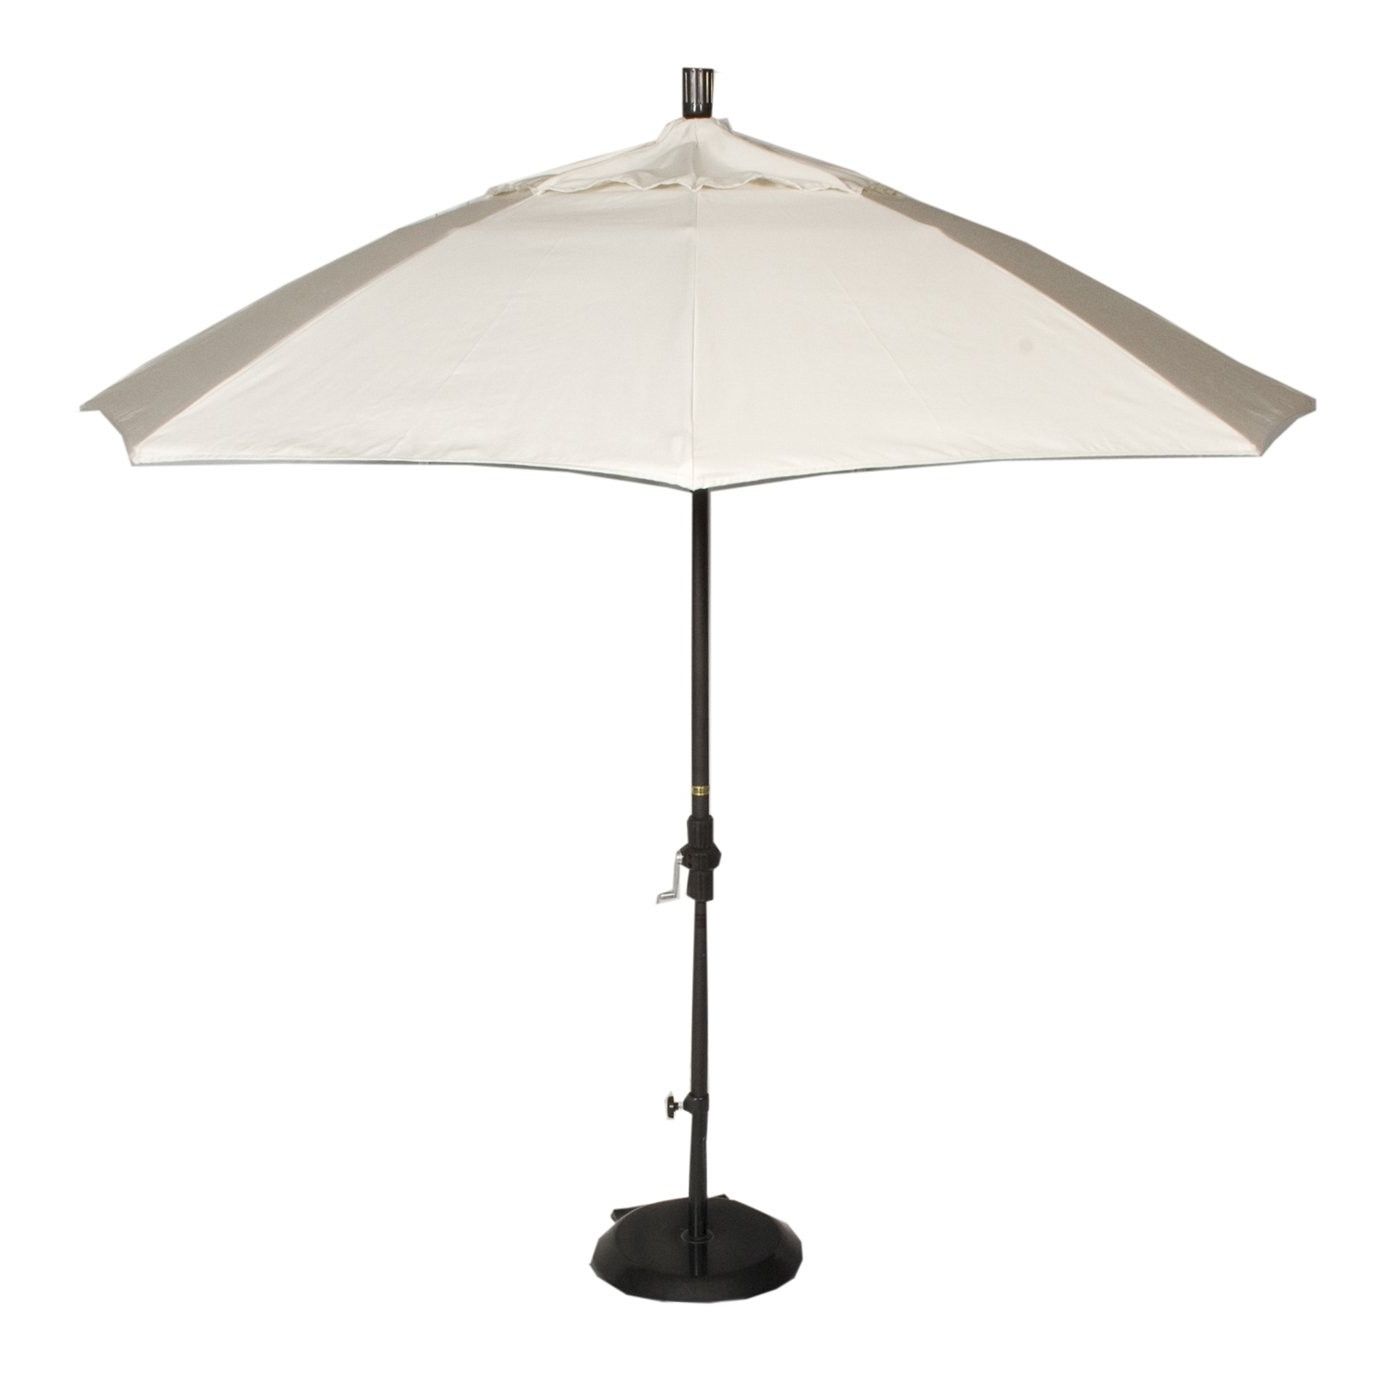 2019 Patio Umbrellas With Sunbrella Fabric In Phat Tommy Outdoor Oasis 9 Ft Aluminum Market Umbrella With (View 13 of 20)